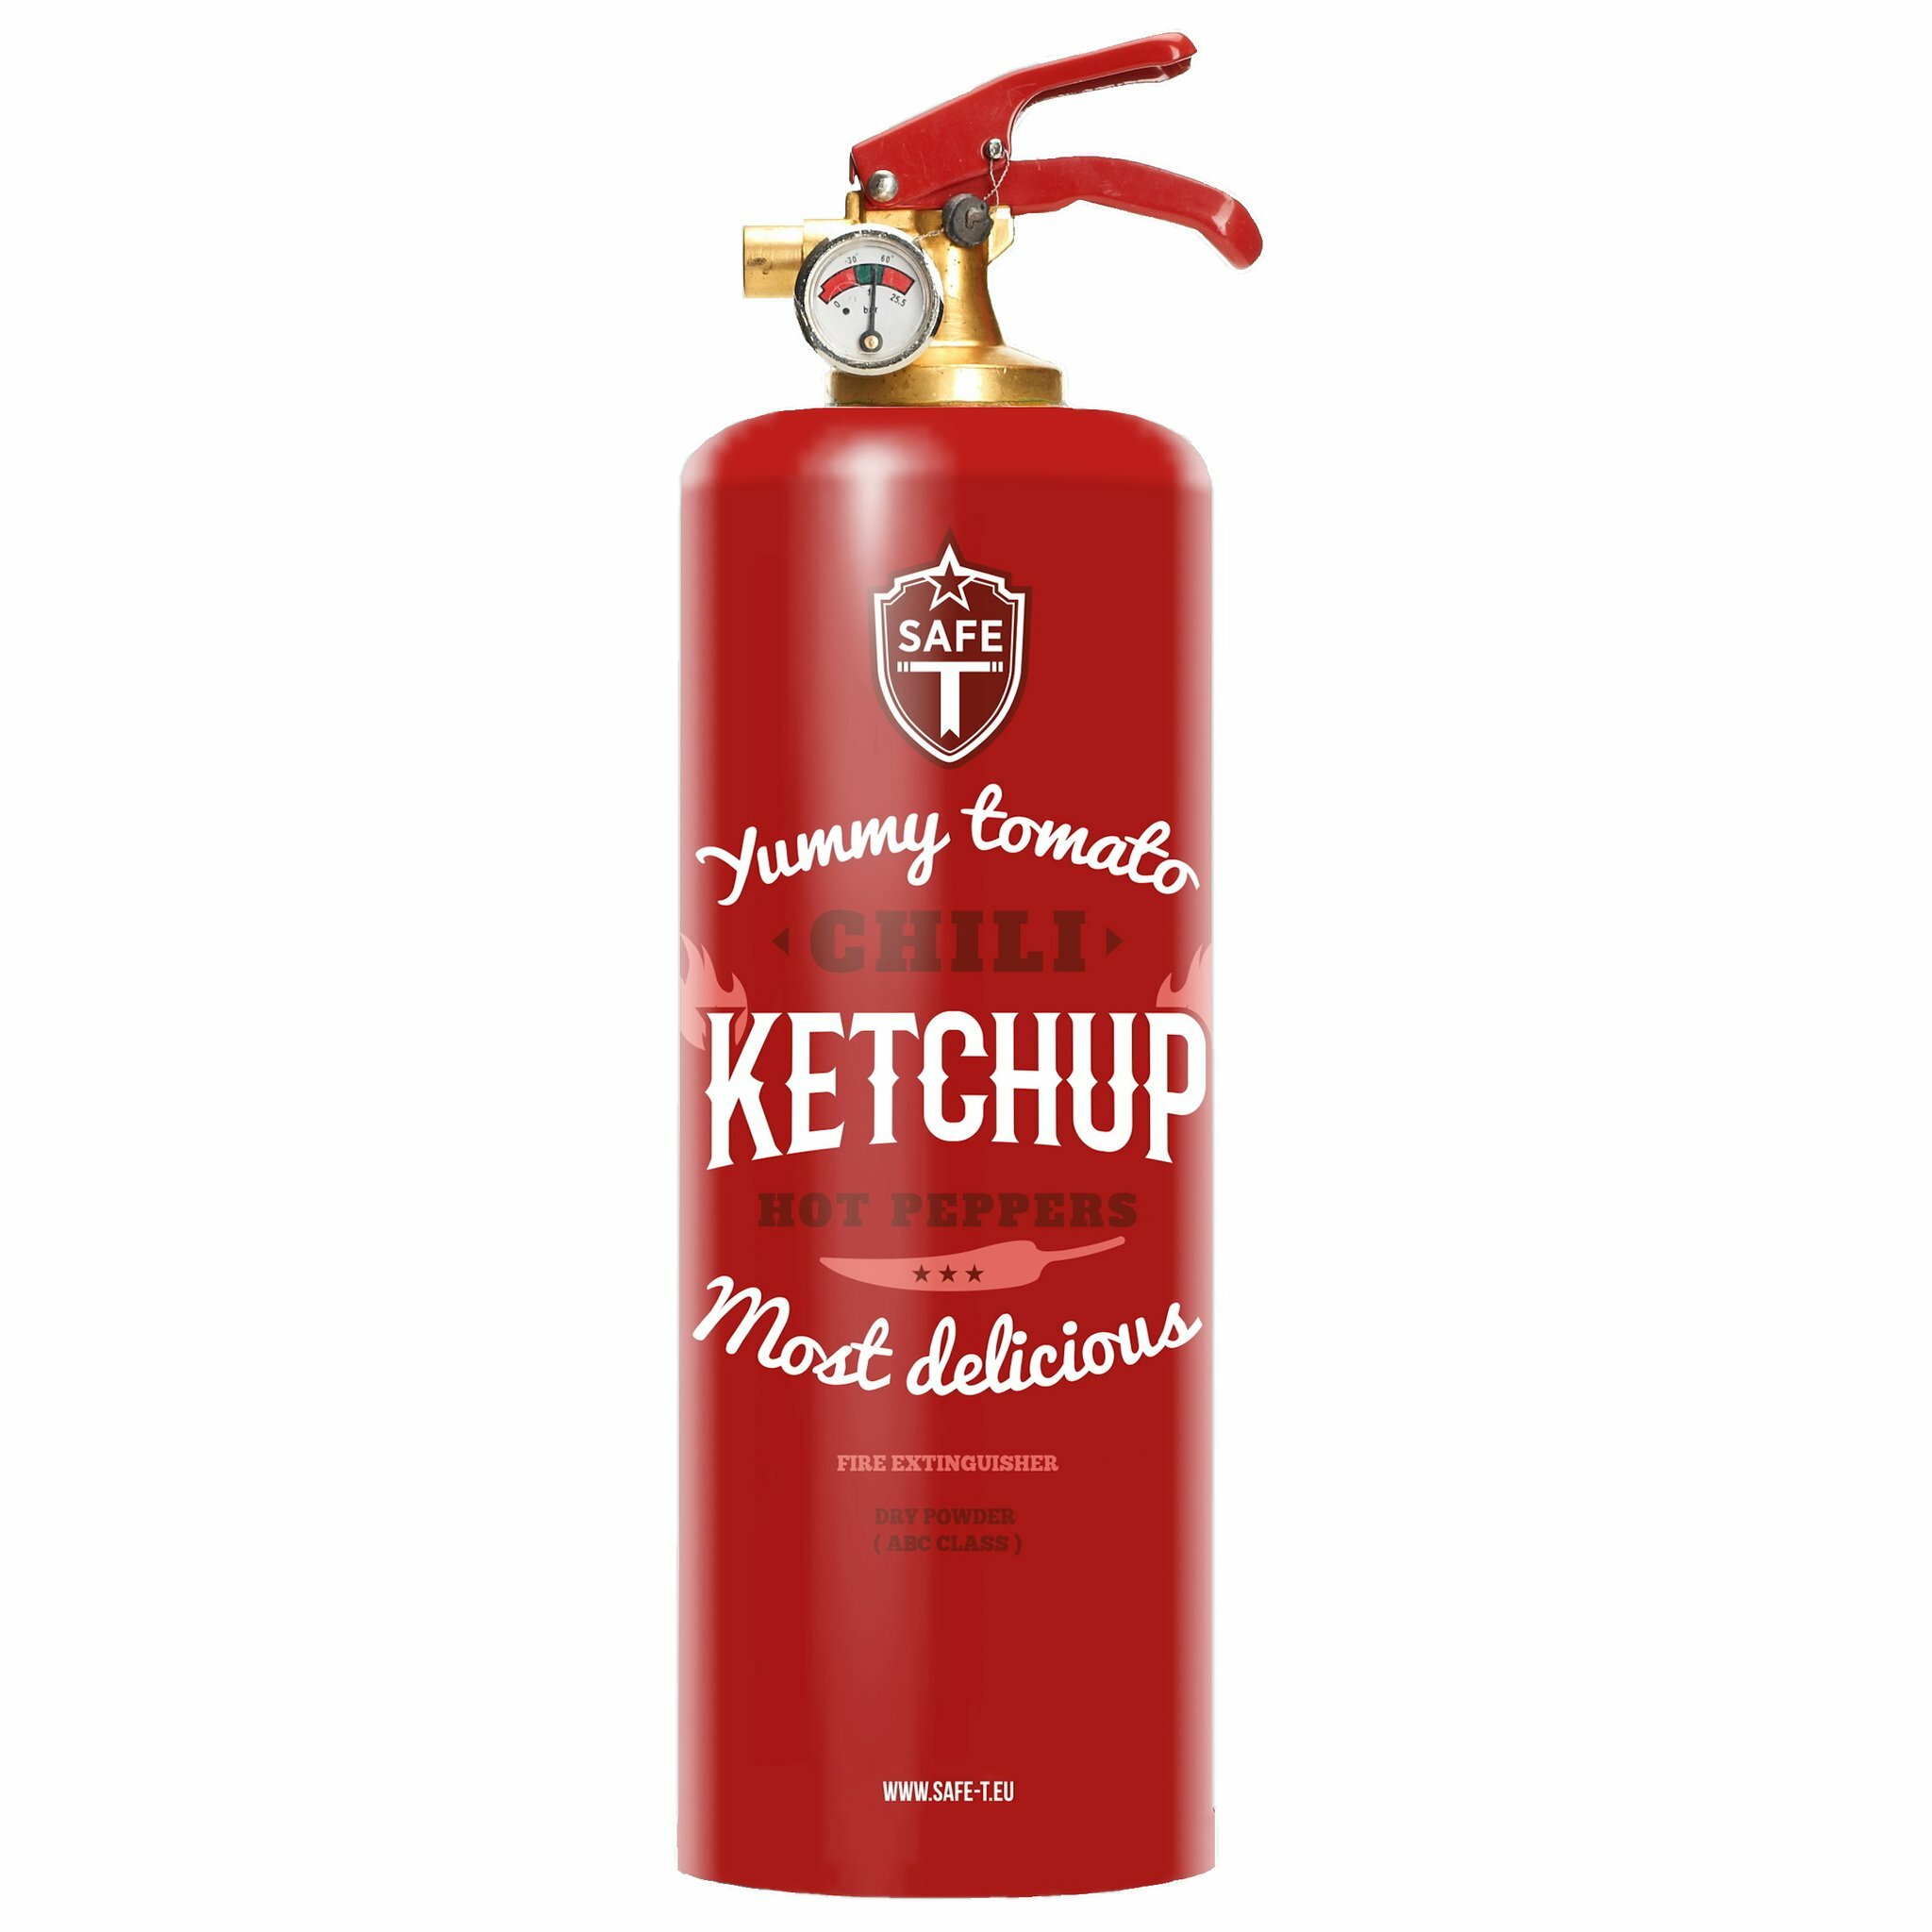 abc fire extinguishers for sale